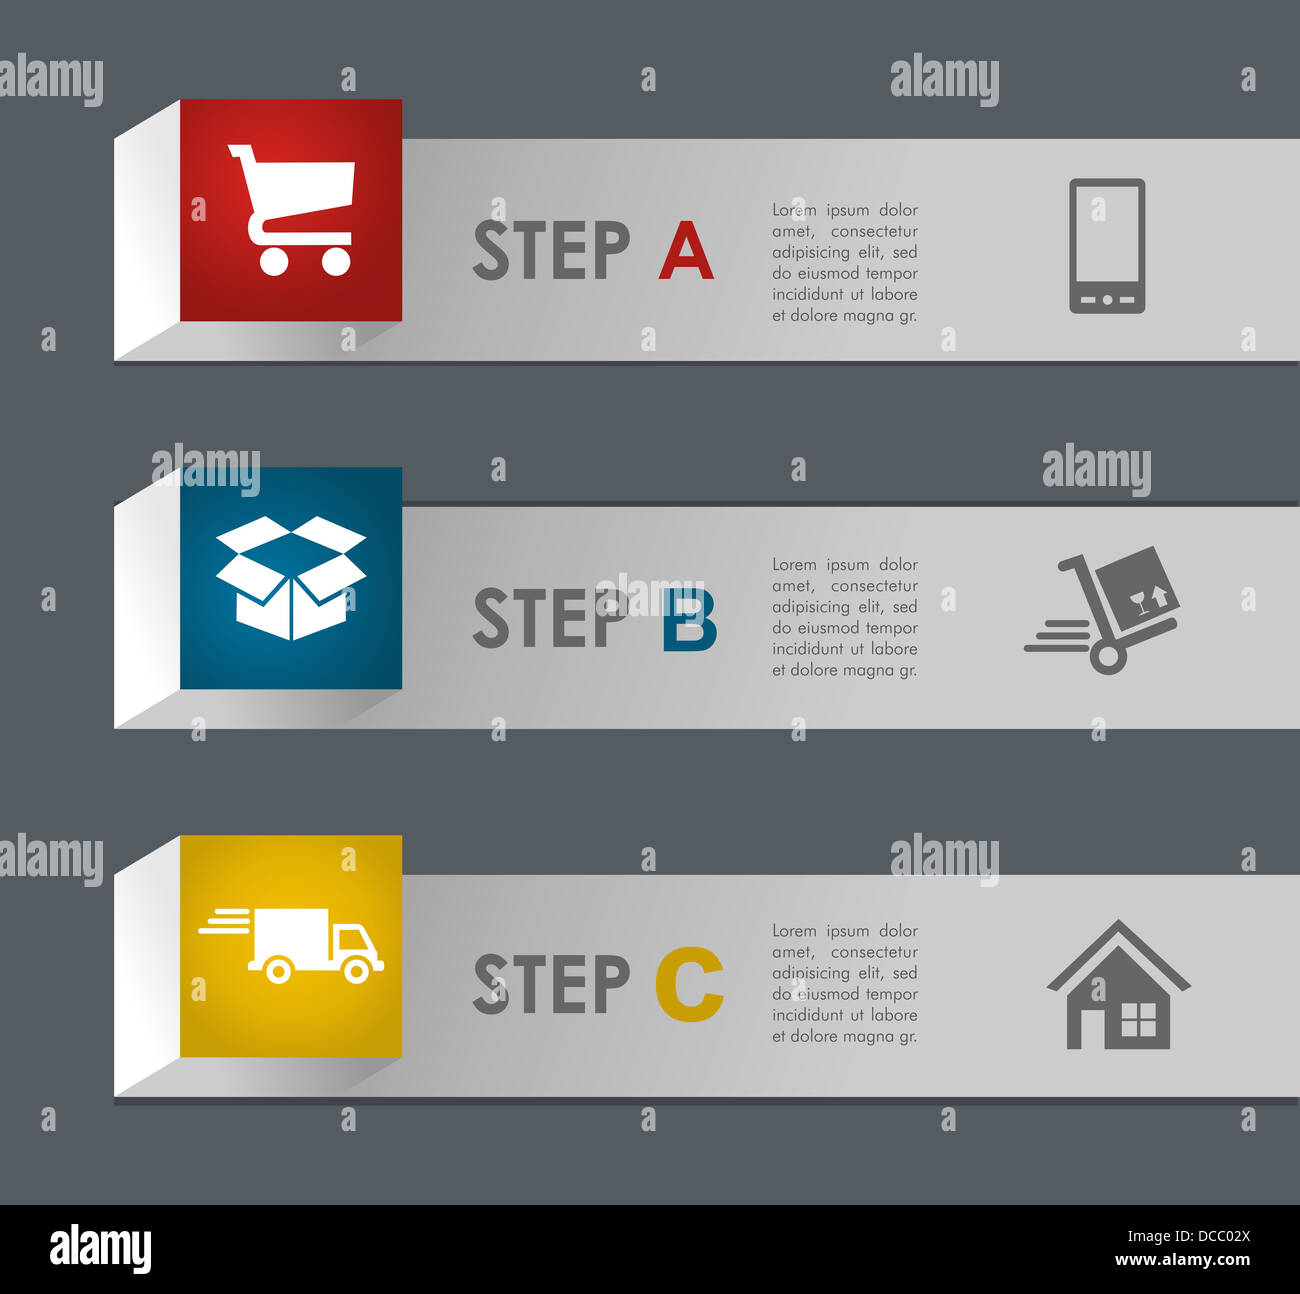 E commerce info graphic icons steps illustration. Vector file layered for easy manipulation and custom coloring. Stock Photo